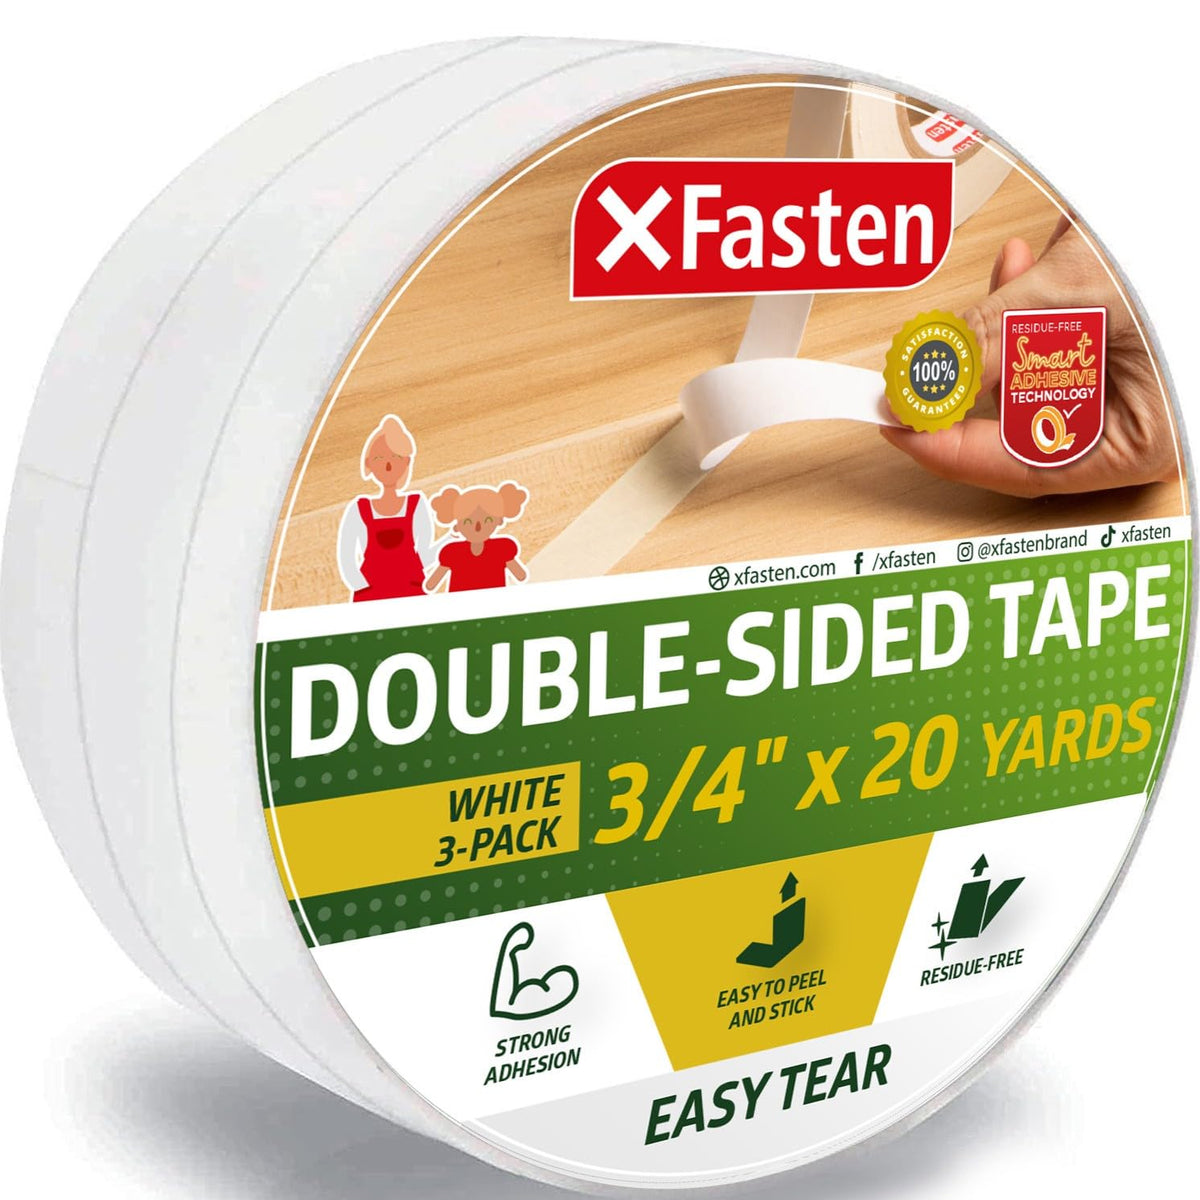 XFasten Double Sided Tape | 3/4 Inch x 20 Yards | Easy Tear | White | 3-Pack